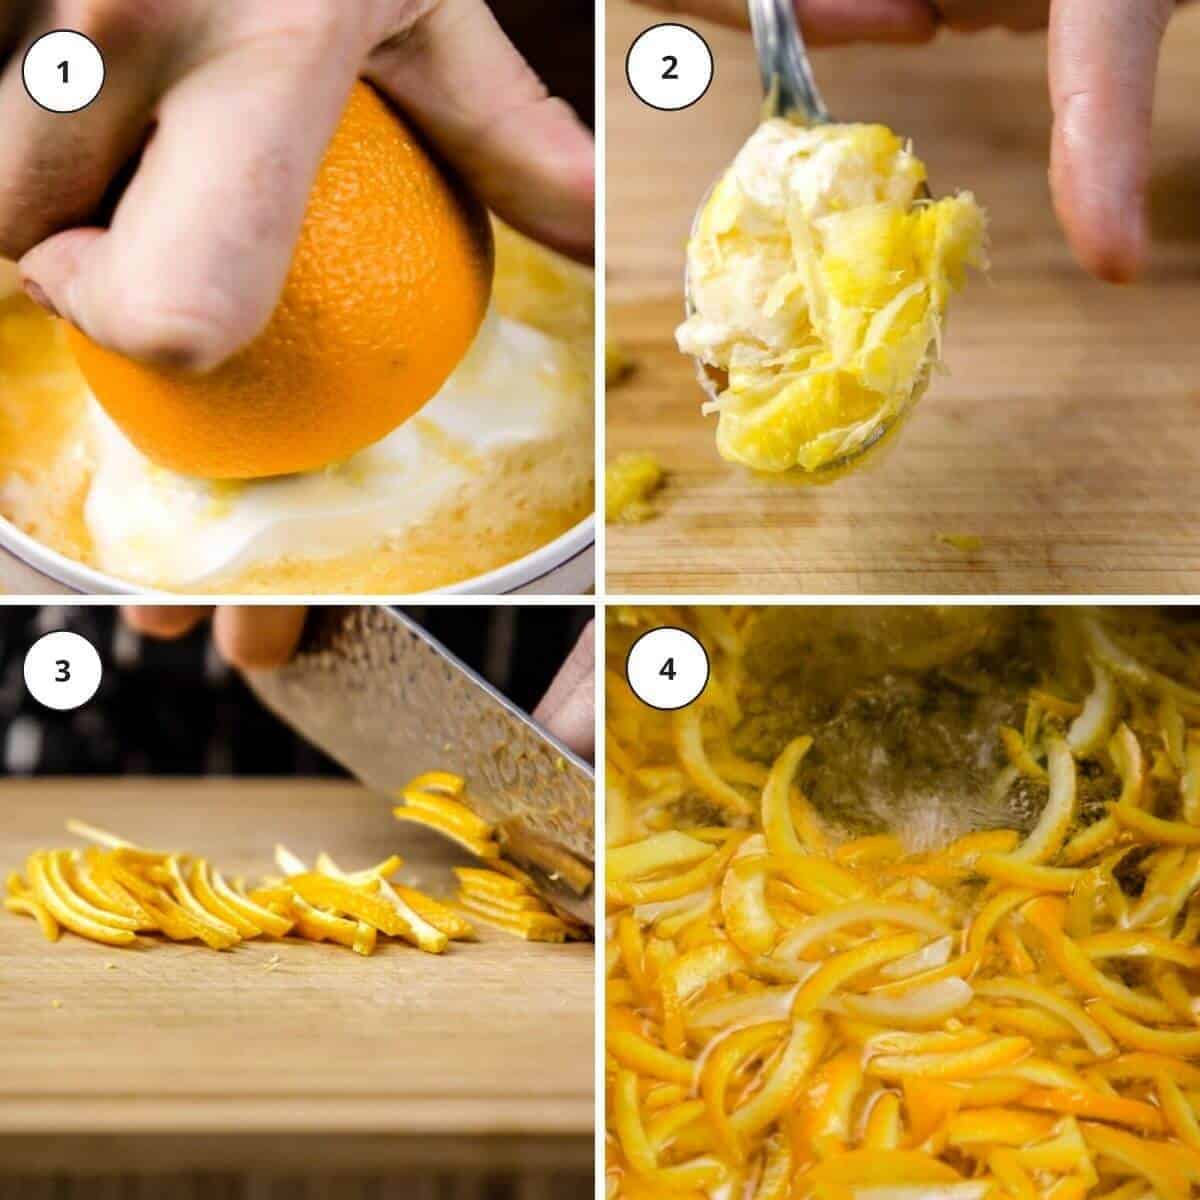 Picture-steps-for-making-orange-marmalade.